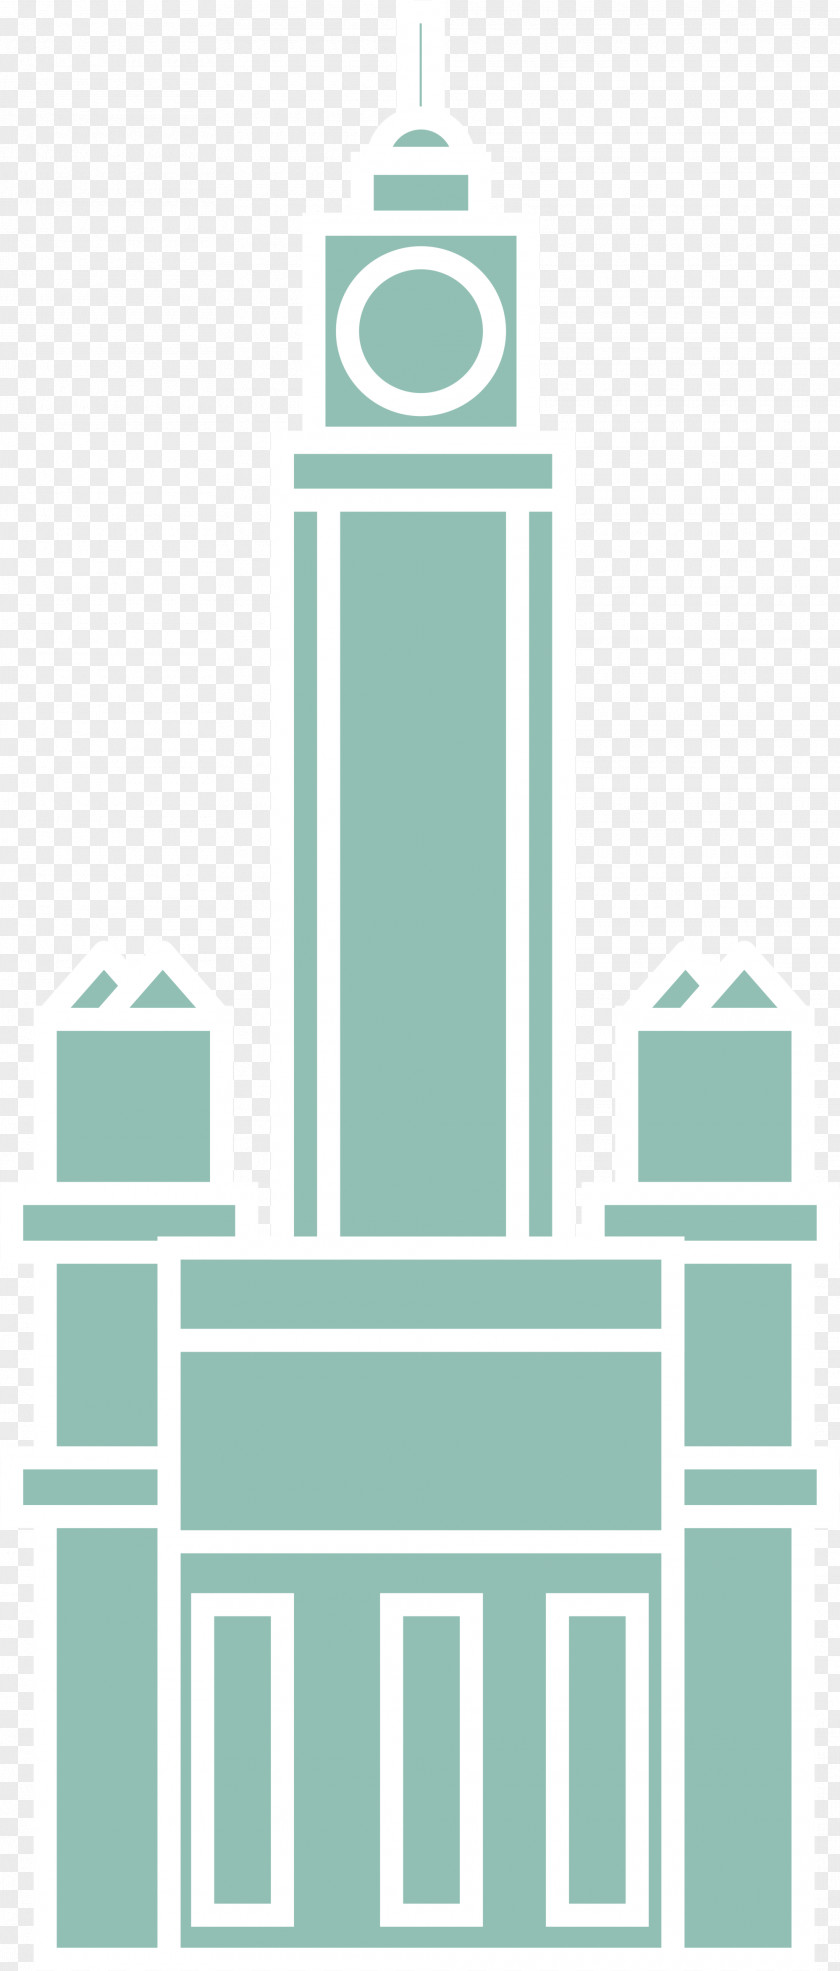 Green Geometry Church Mecca Building Illustration PNG